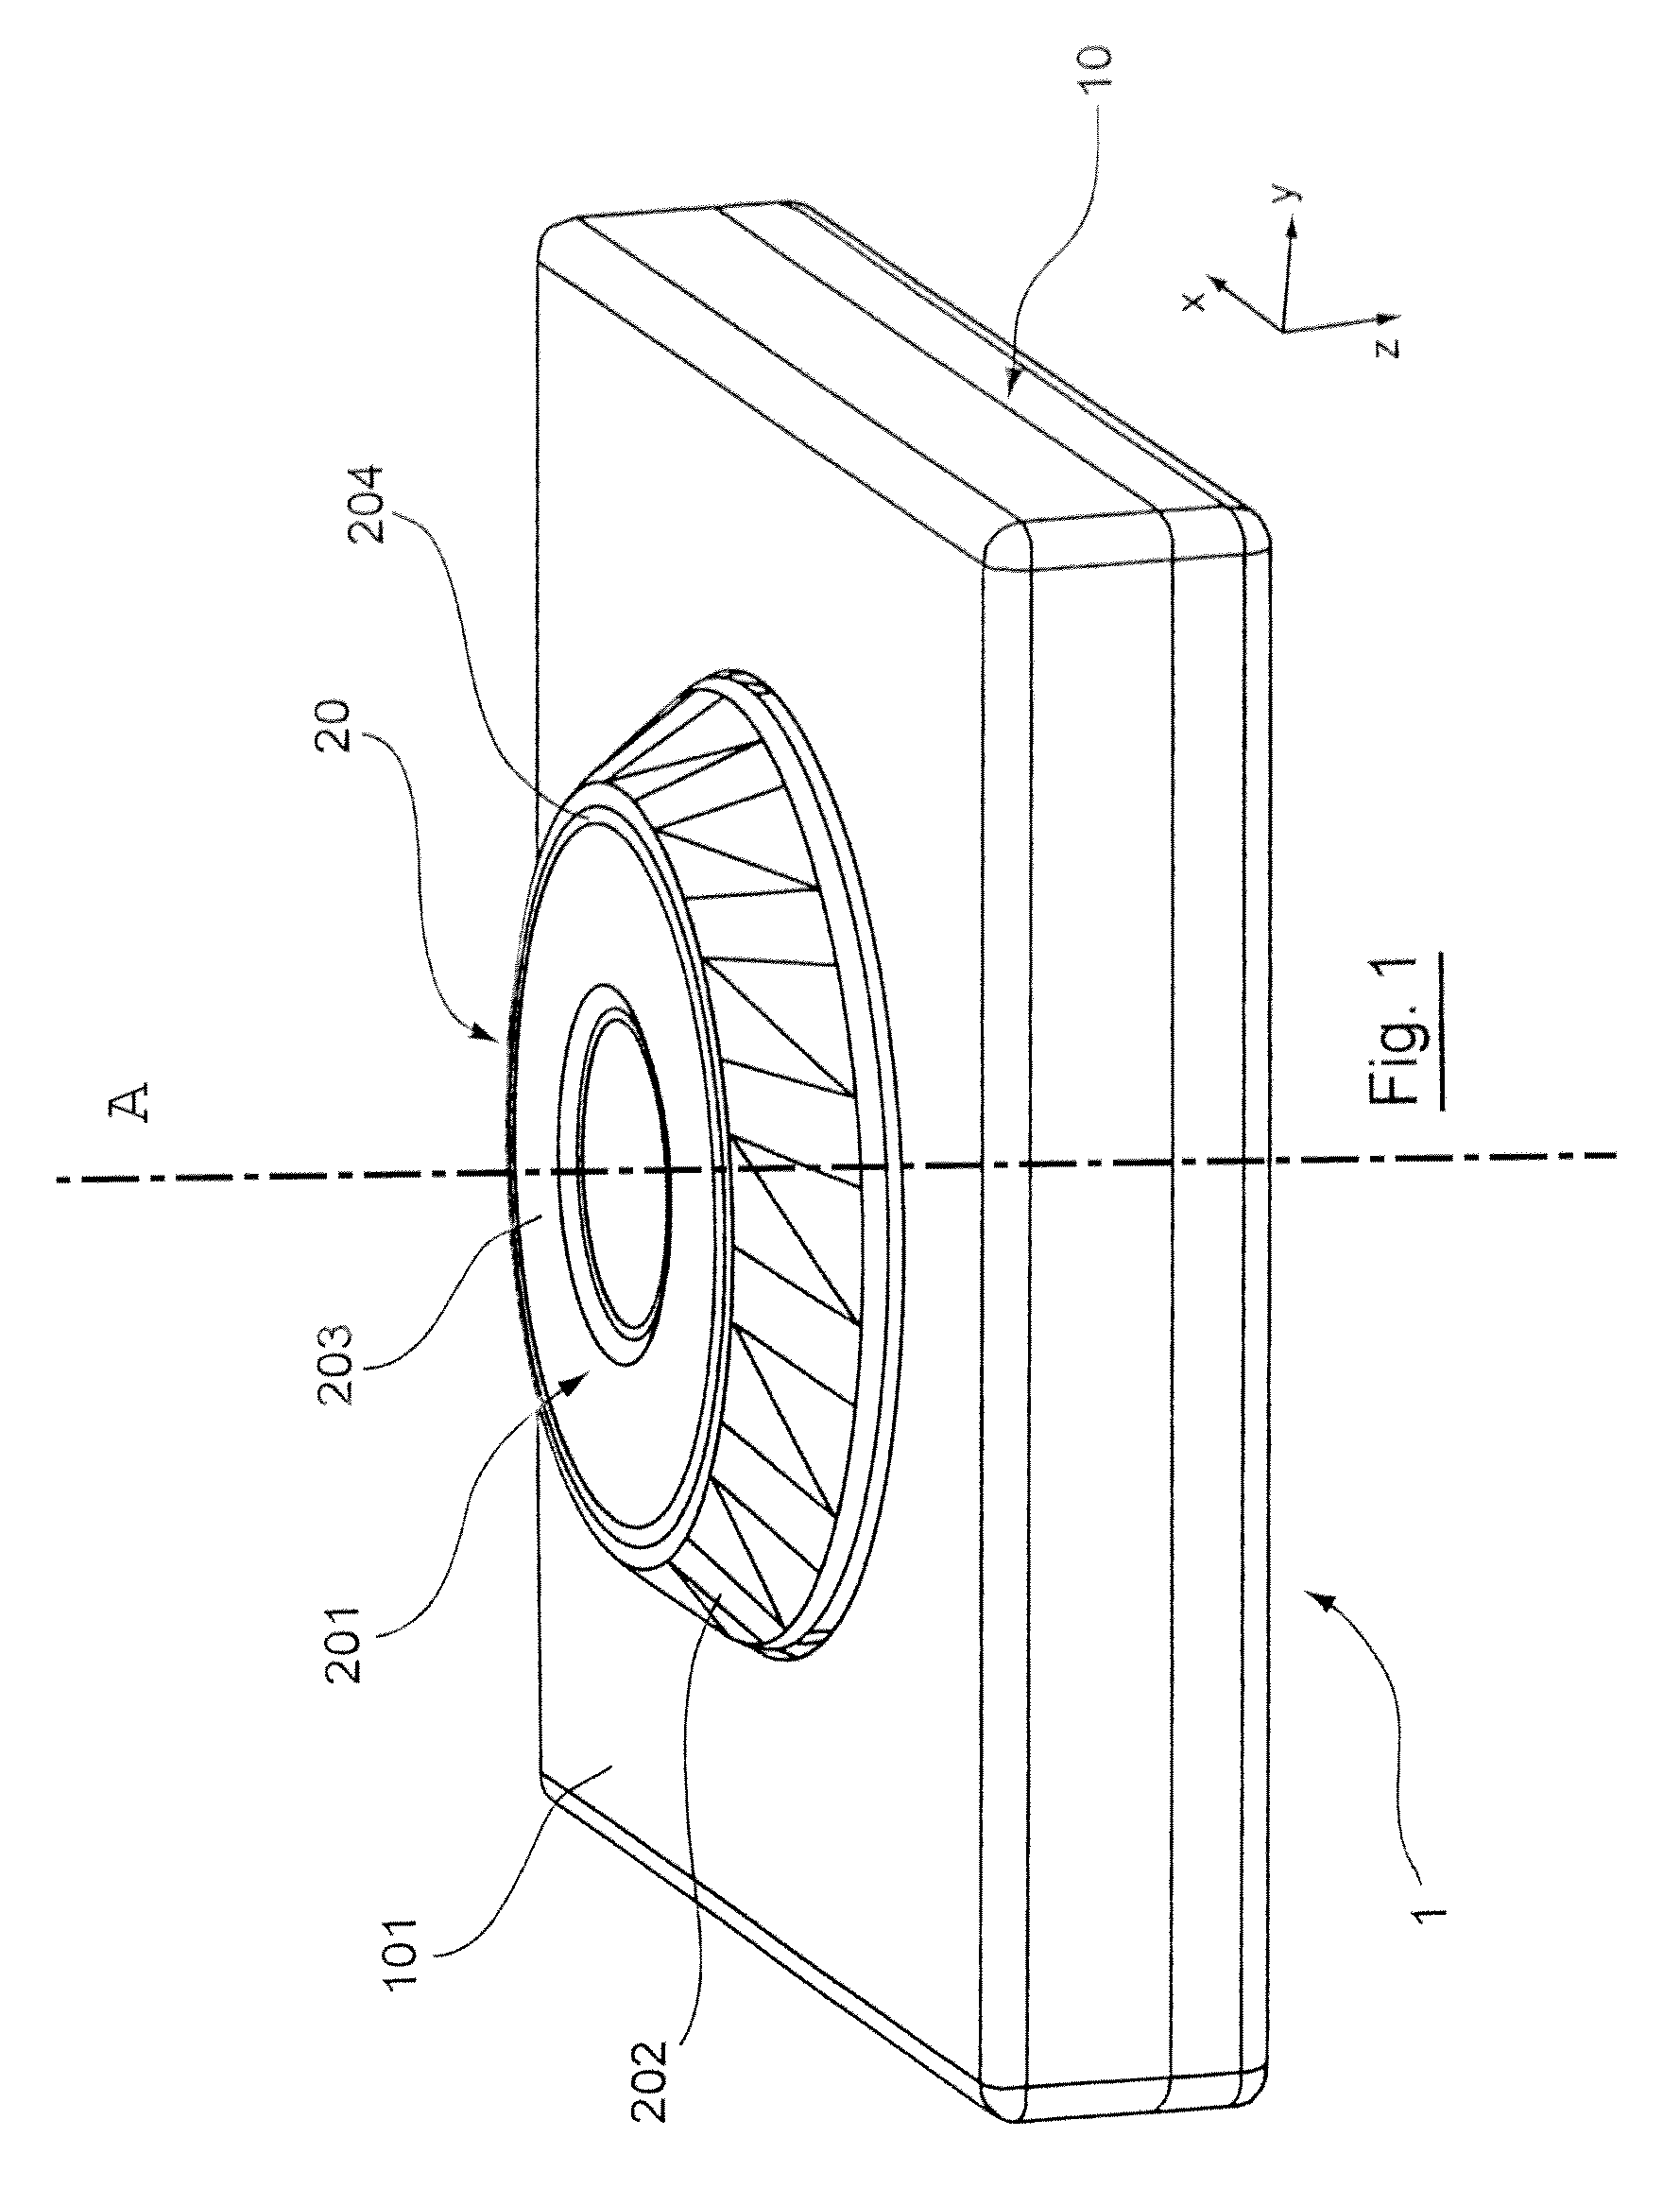 Device for controlling at least one audio signal and corresponding electronic mixing console